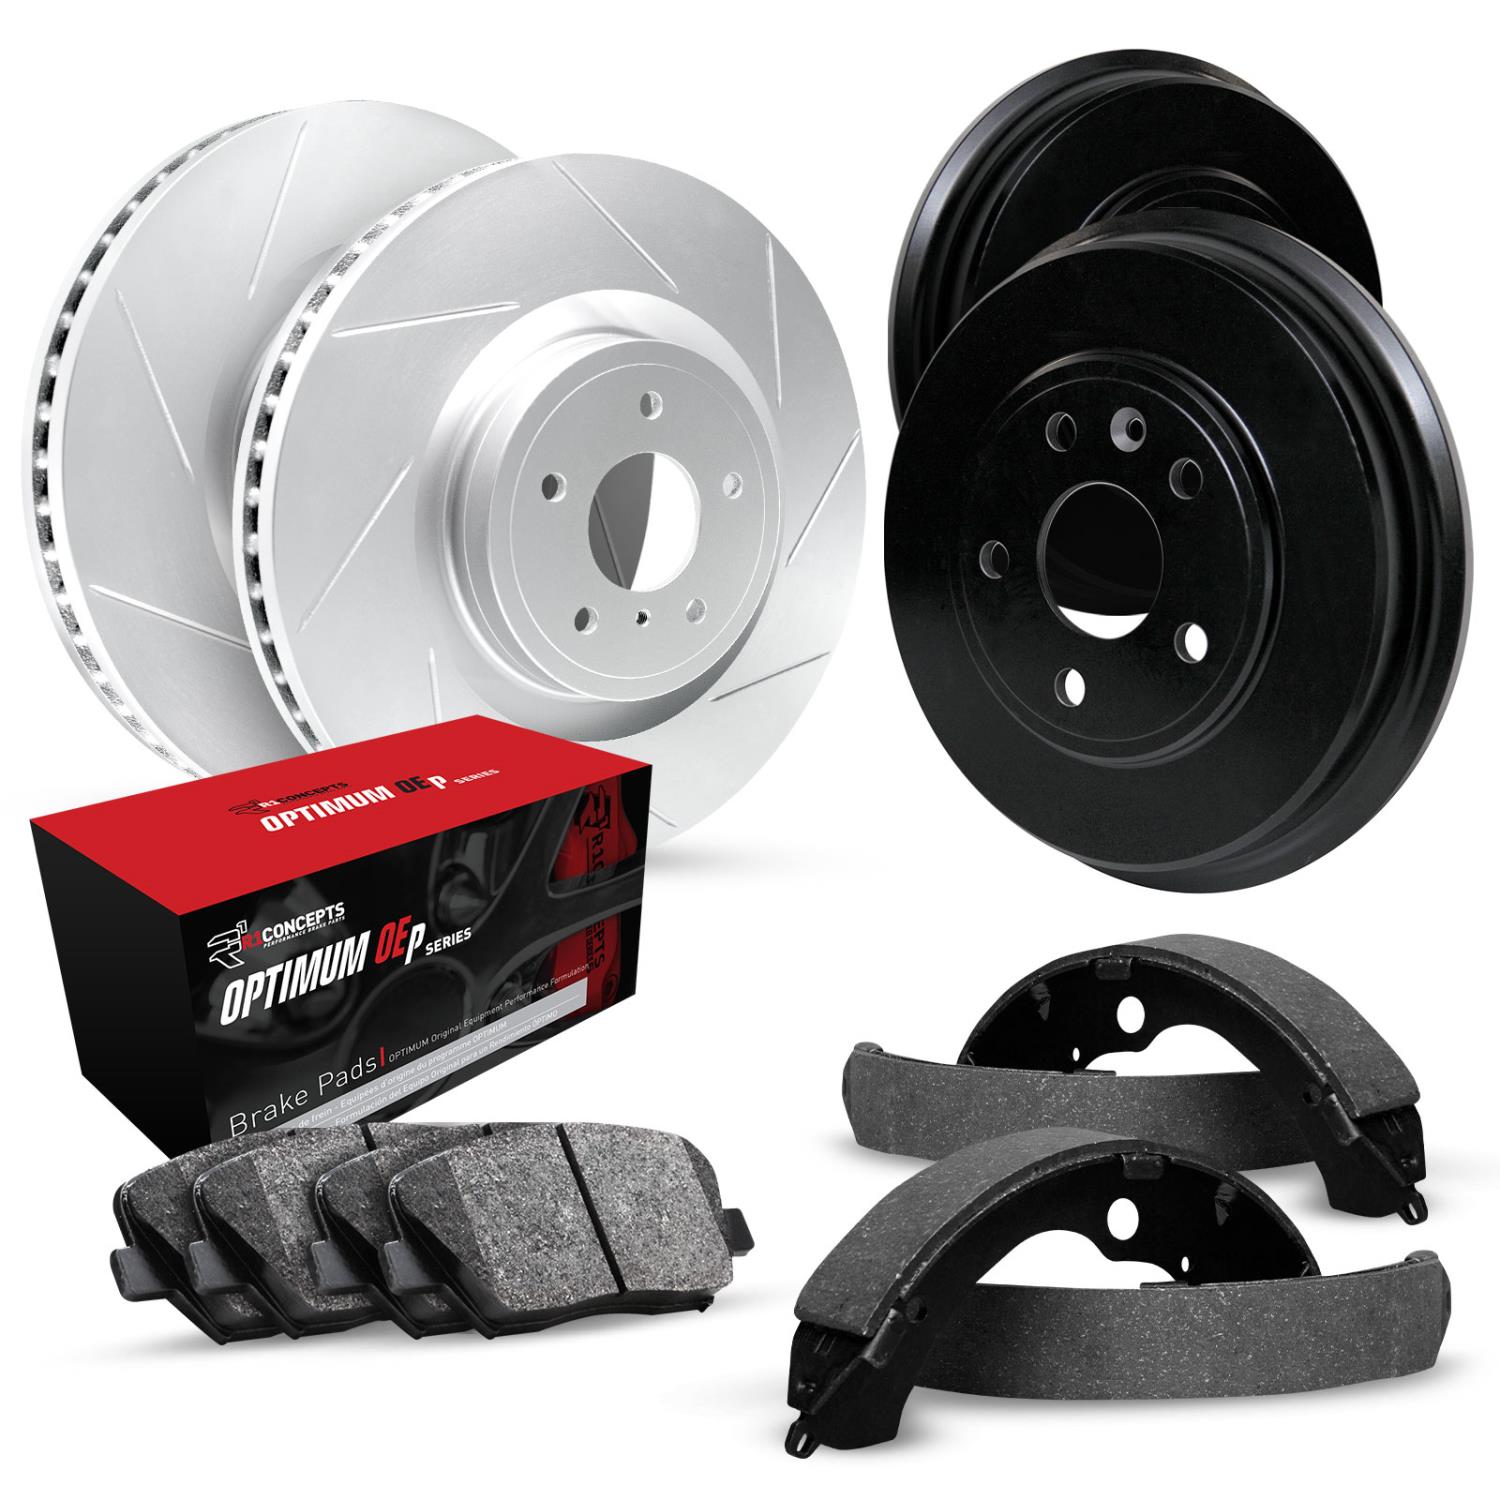 GEO-Carbon Slotted Brake Rotor & Drum Set w/Optimum OE Pads & Shoes, 1983-1984 GM, Position: Front & Rear